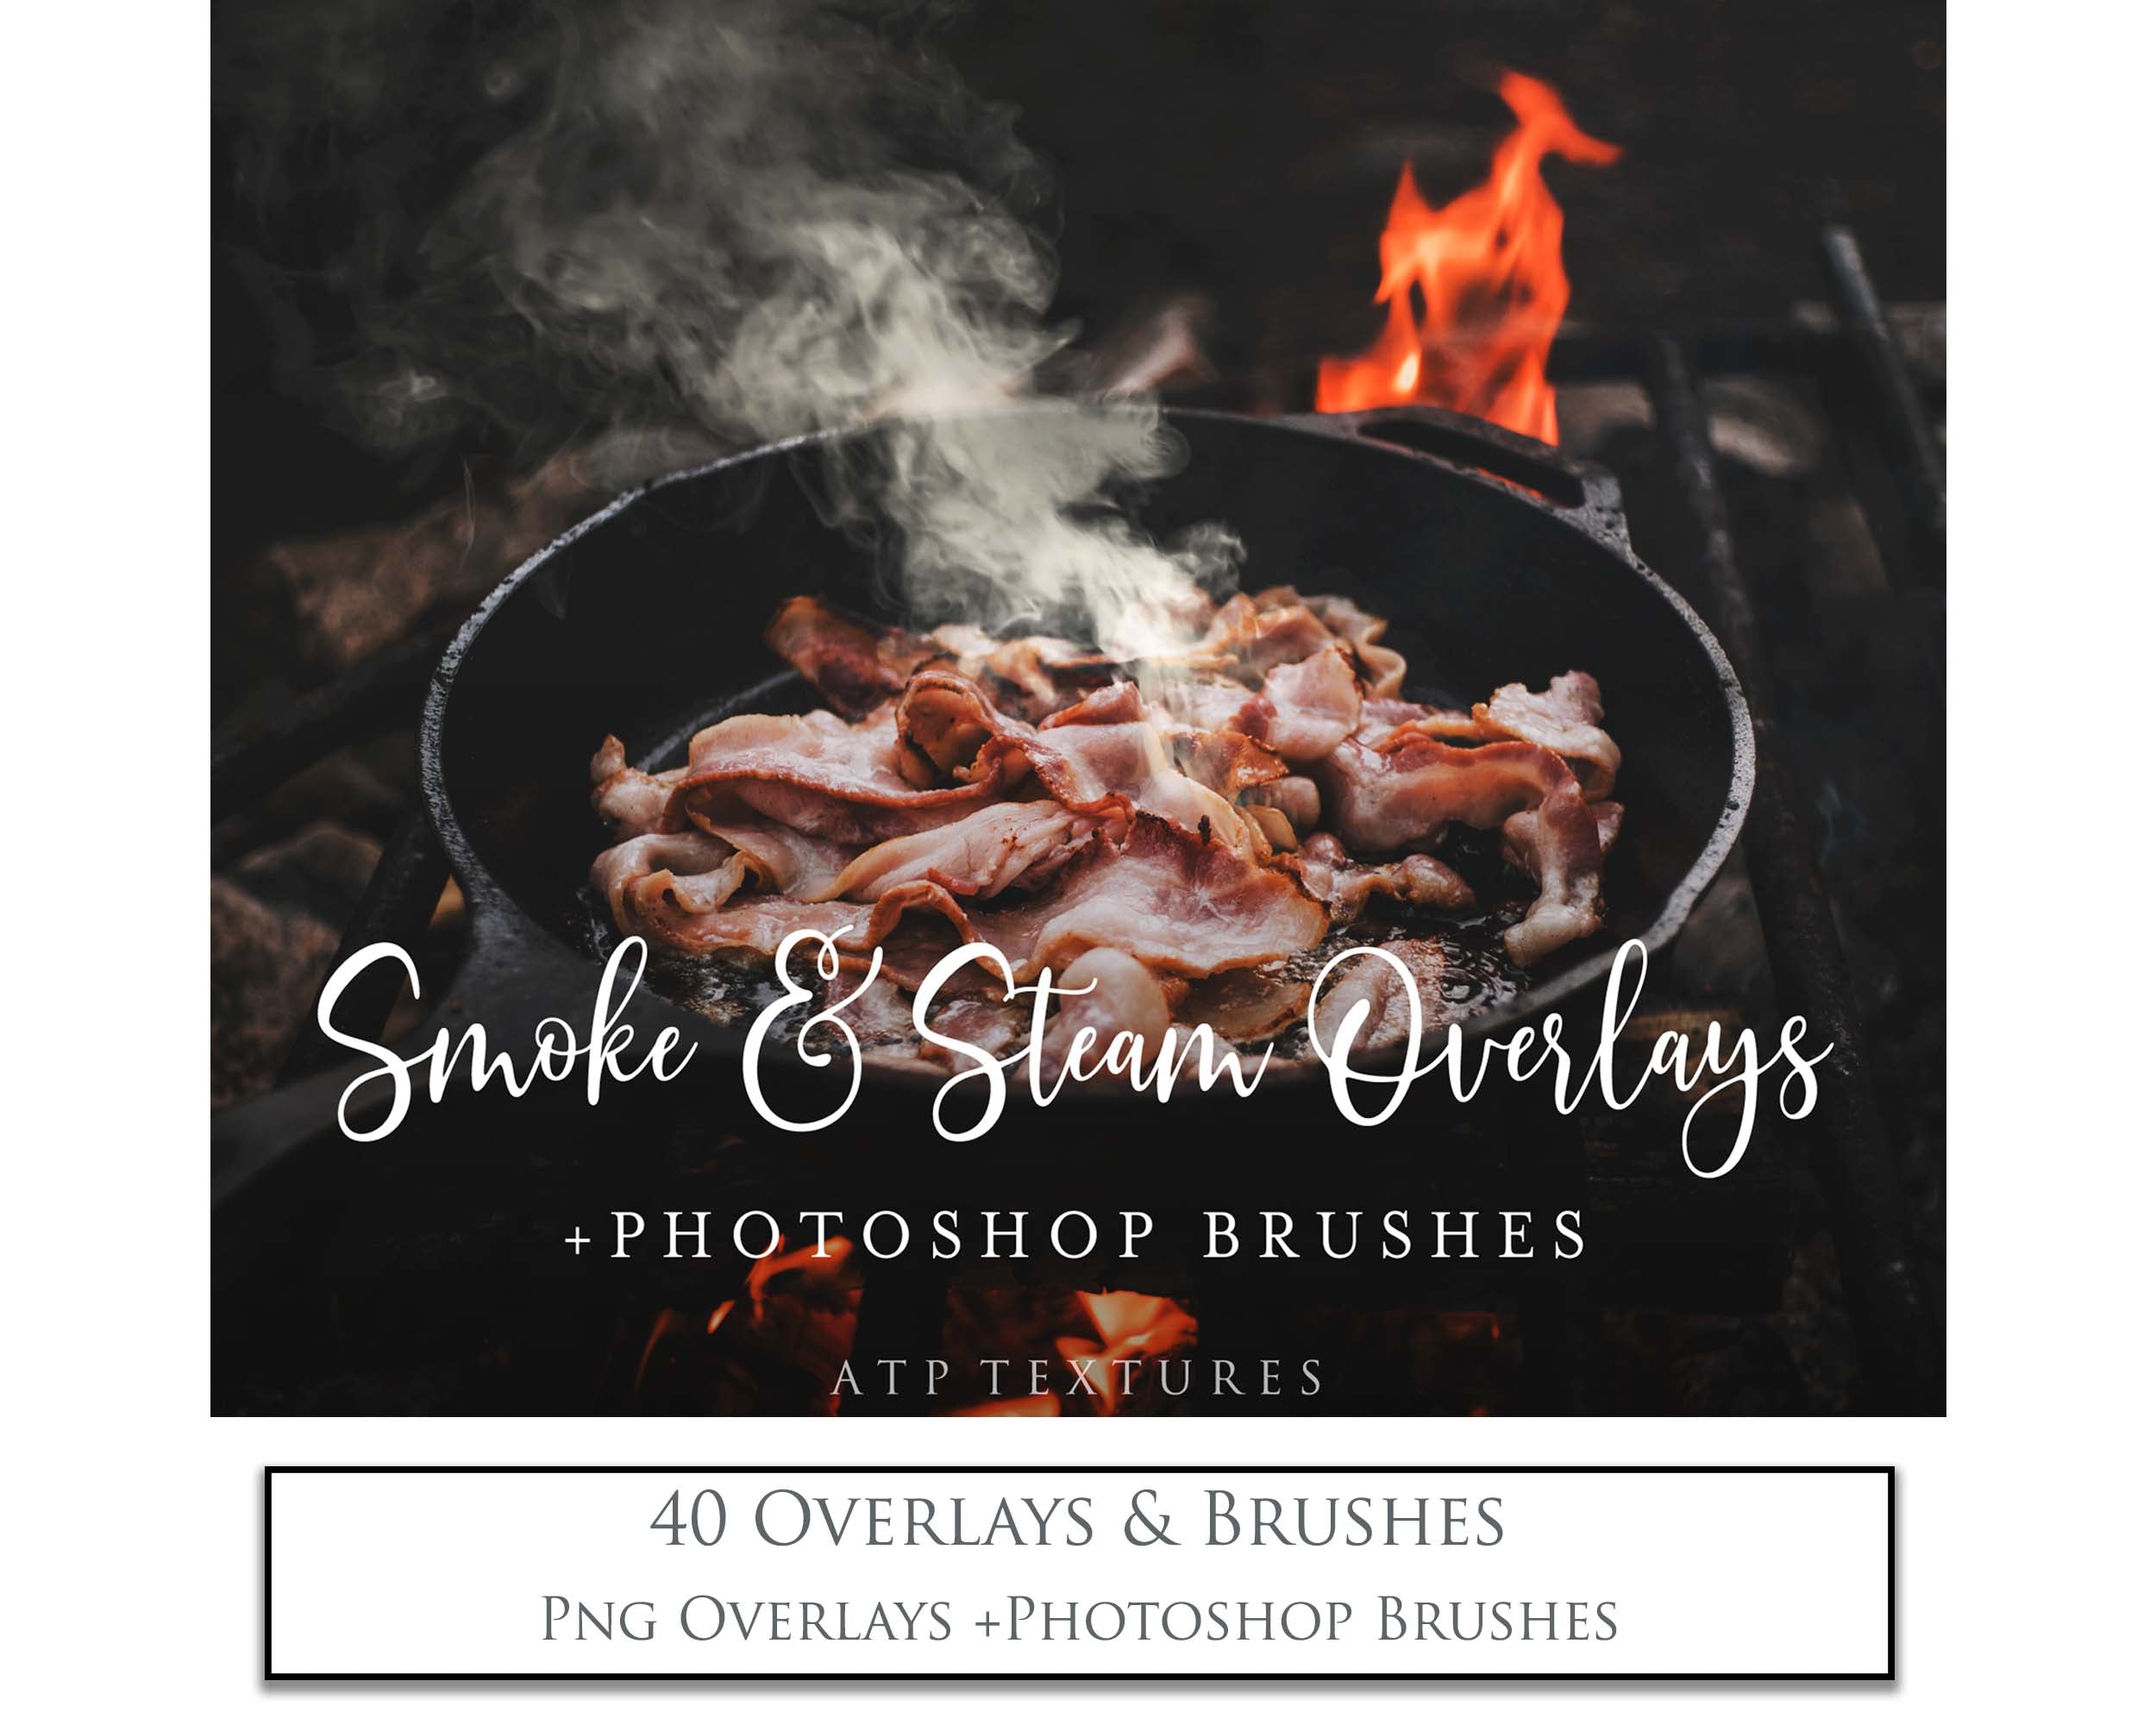 Smoke and Steam Overlays &Brushes! Photoshop brushes with png clipart overlays for photography and digital design. Digital Stamps for scrapbooking, photography and graphic design. Assets and Add ons. High resolution digital files. ATP Textures